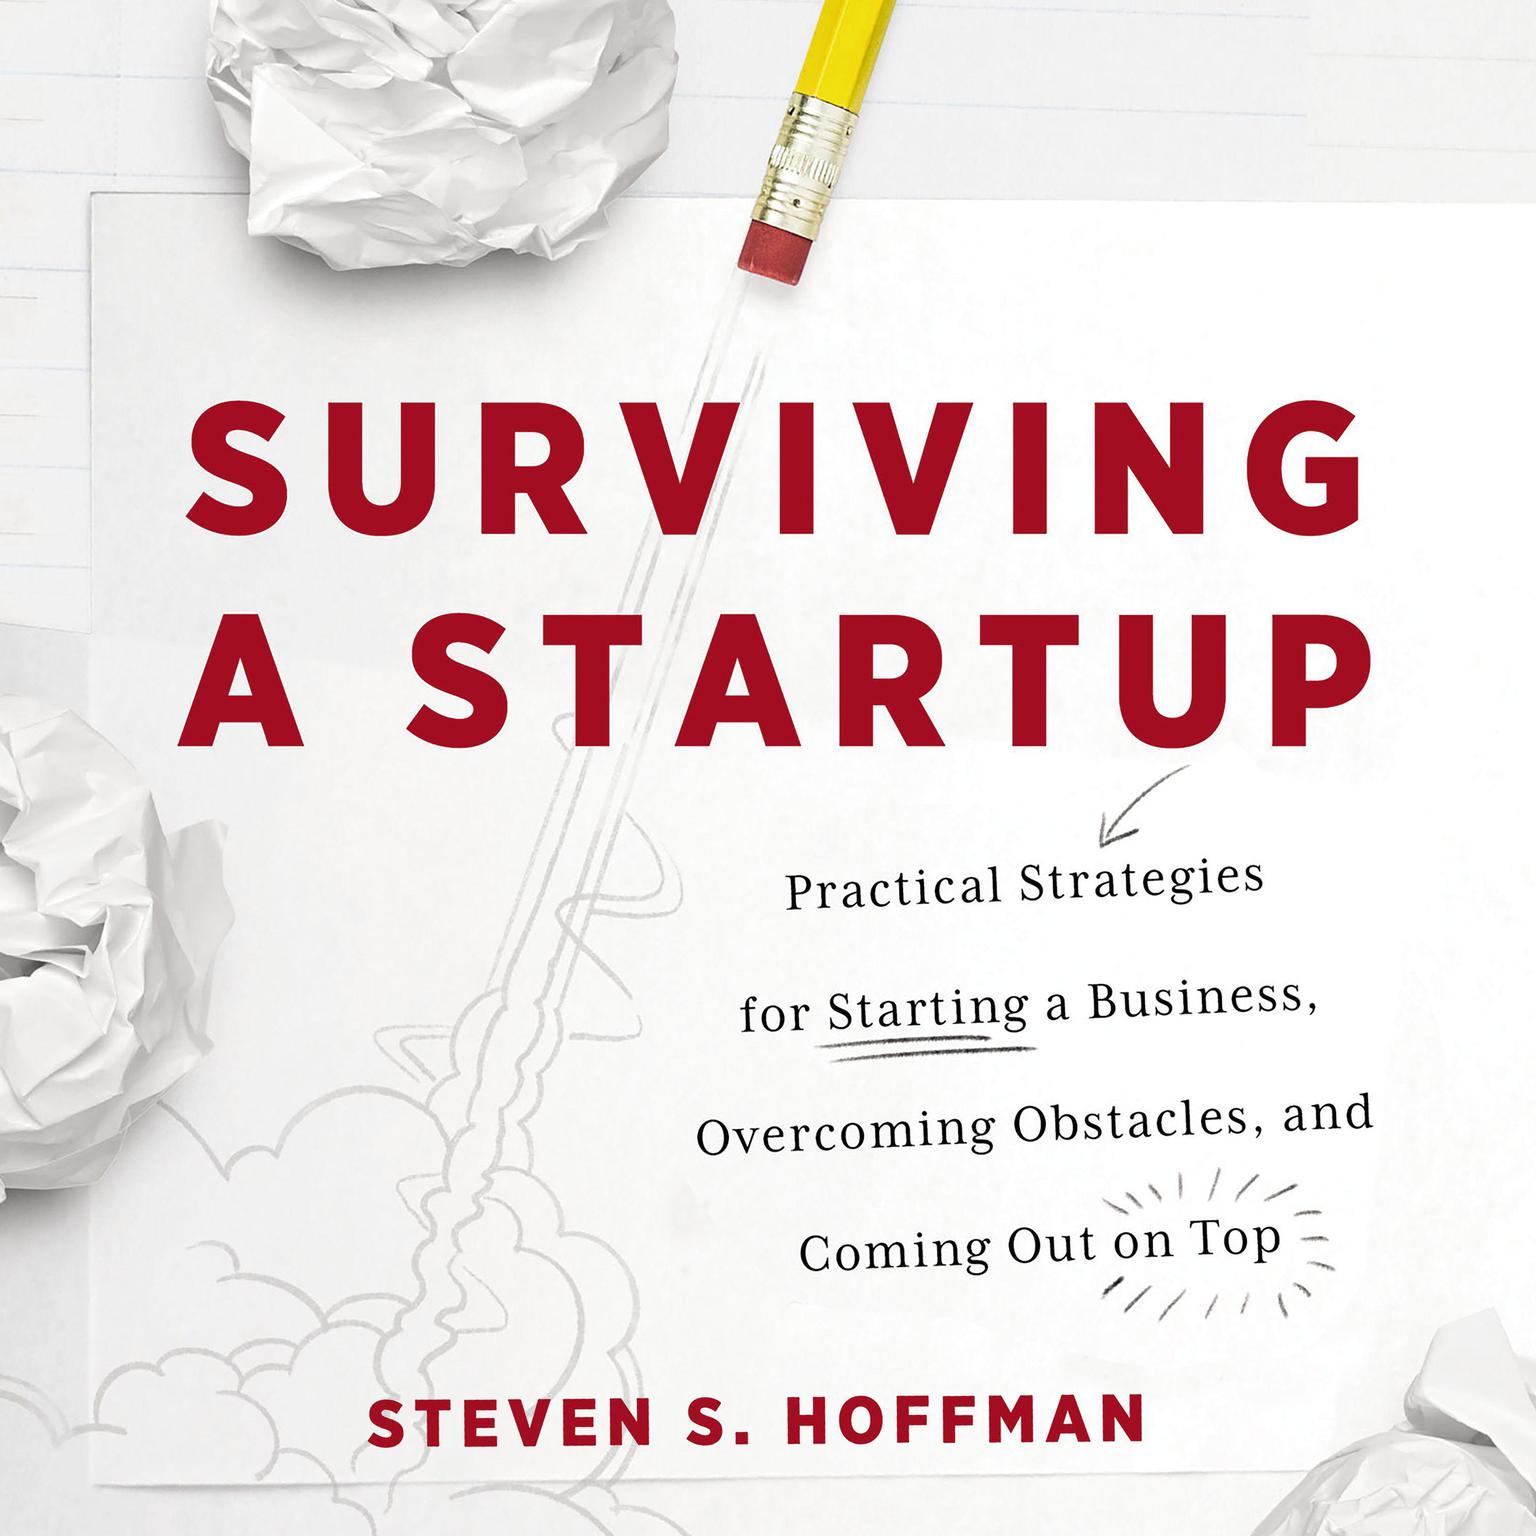 Surviving a Startup: Practical Strategies for Starting a Business, Overcoming Obstacles, and Coming Out on Top Audiobook, by Steven S. Hoffman